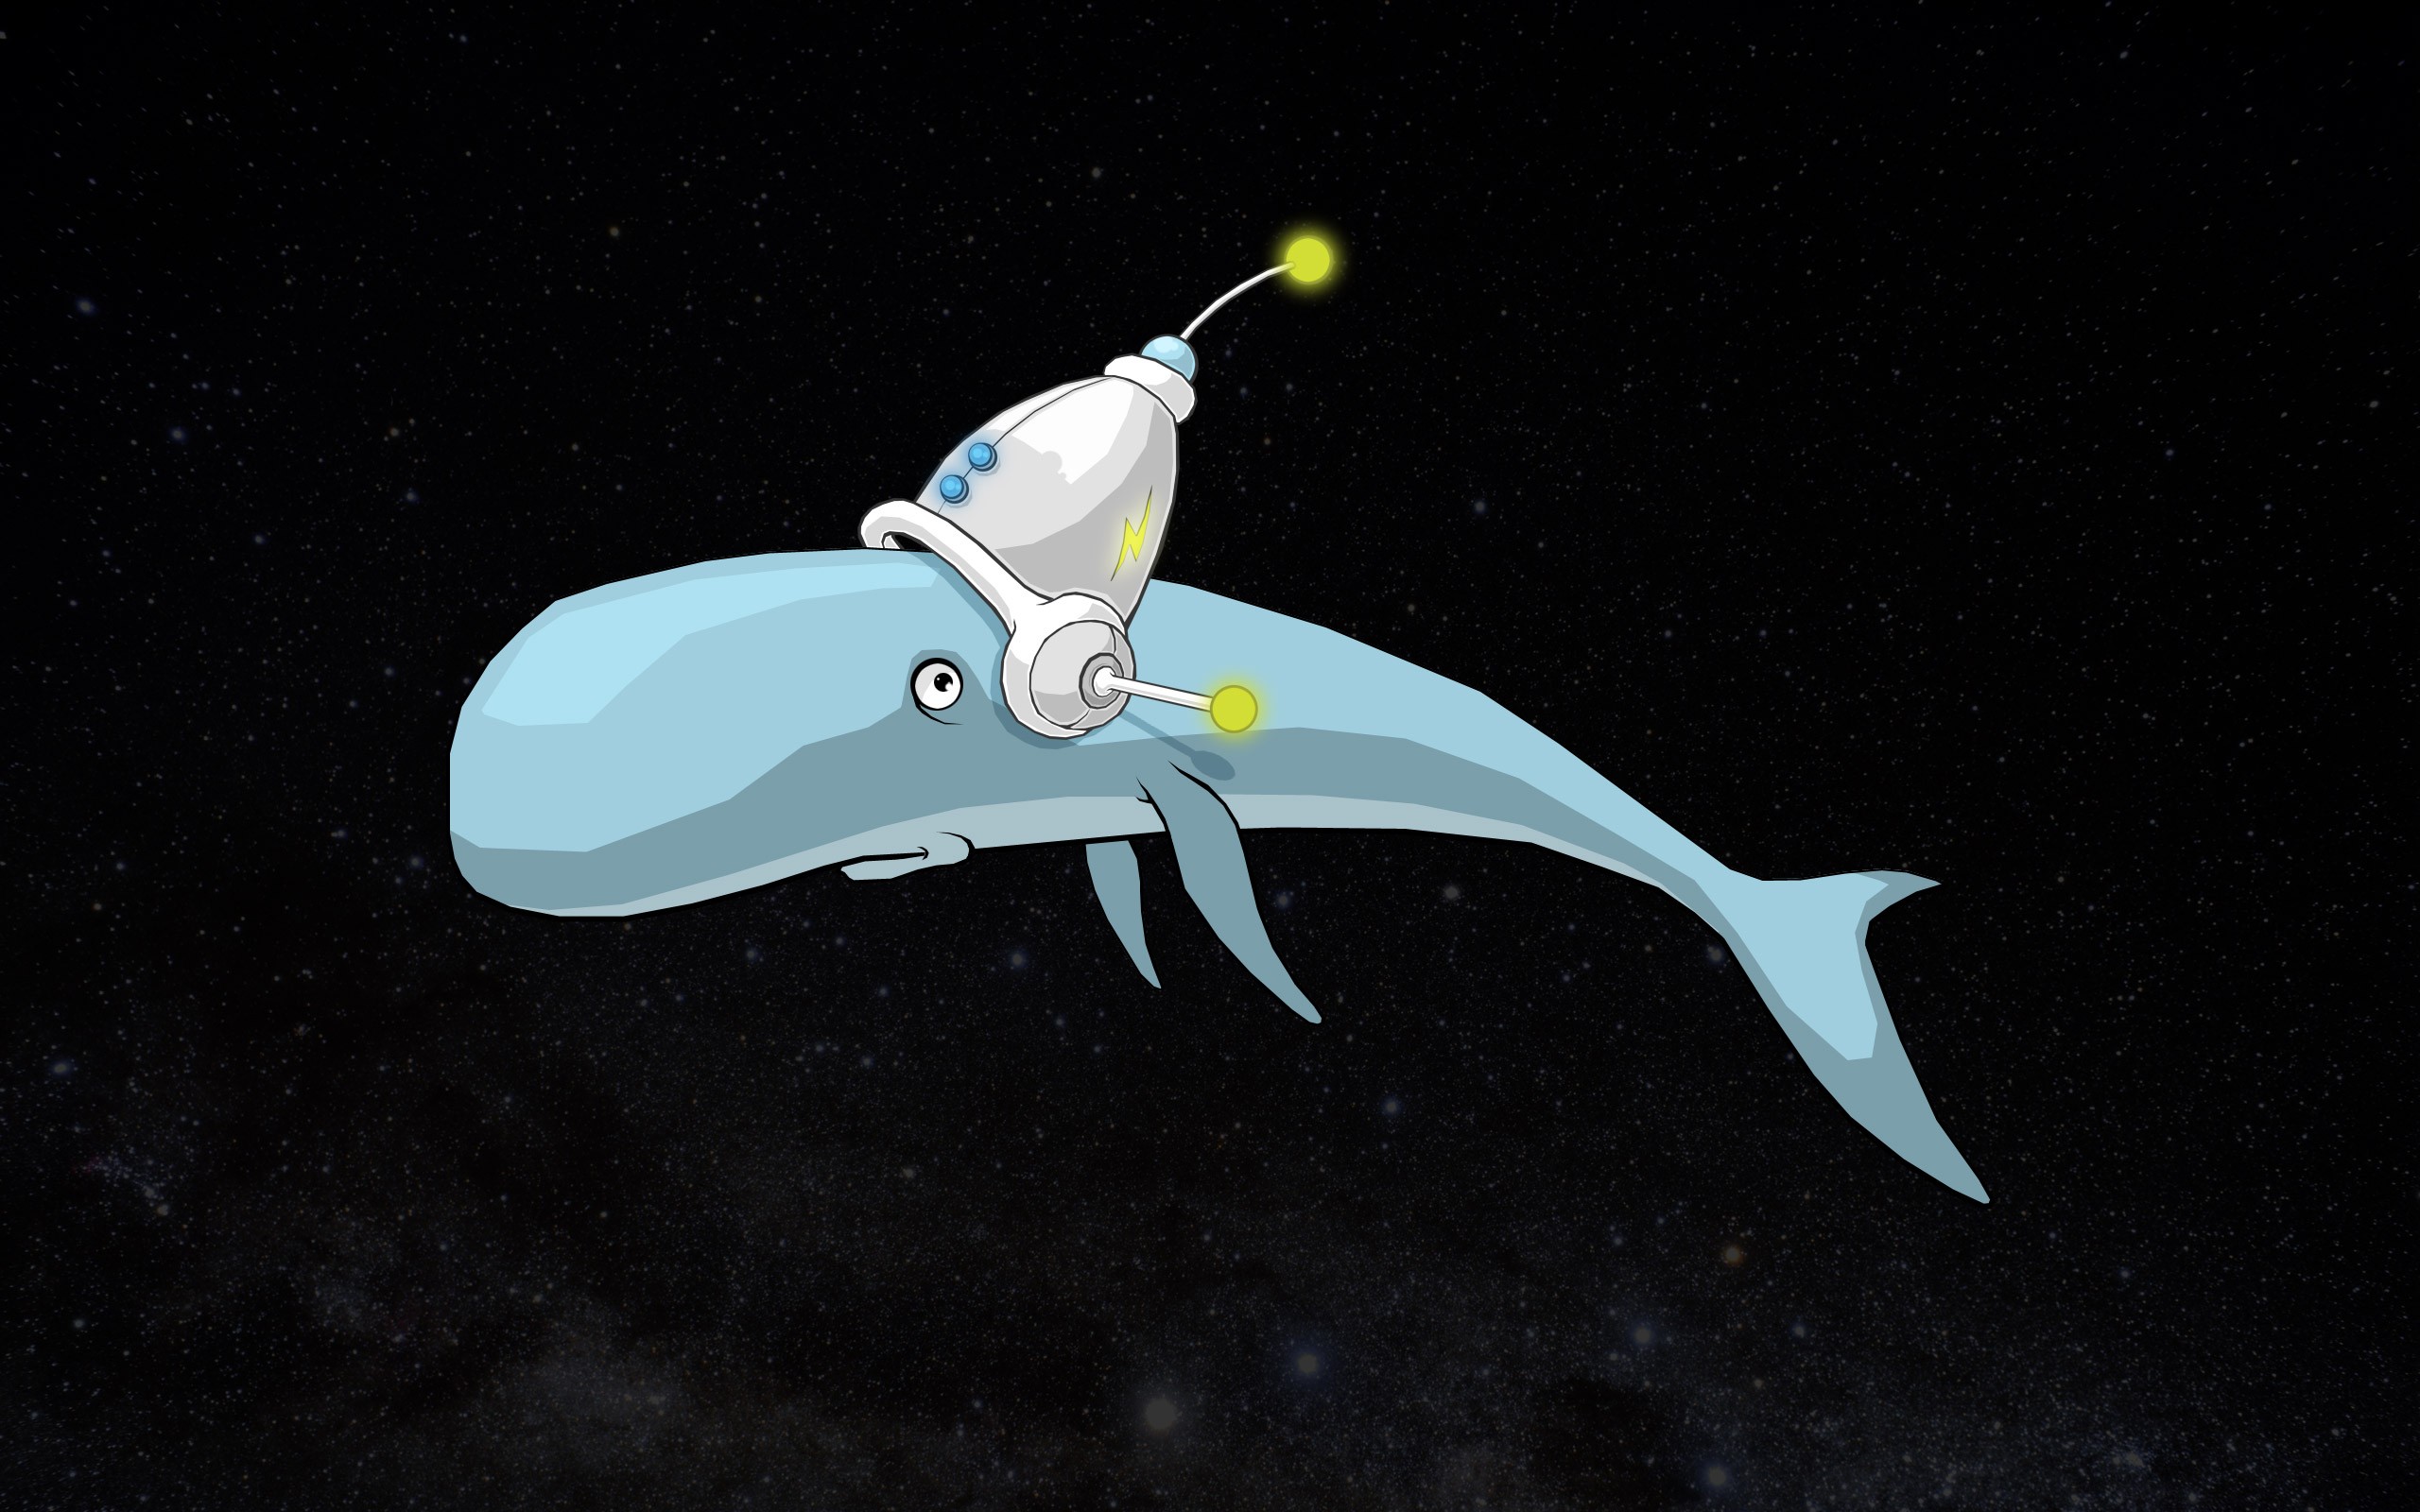 General 2560x1600 whale space The Hitchhiker's Guide to the Galaxy helmet stars cartoon humor